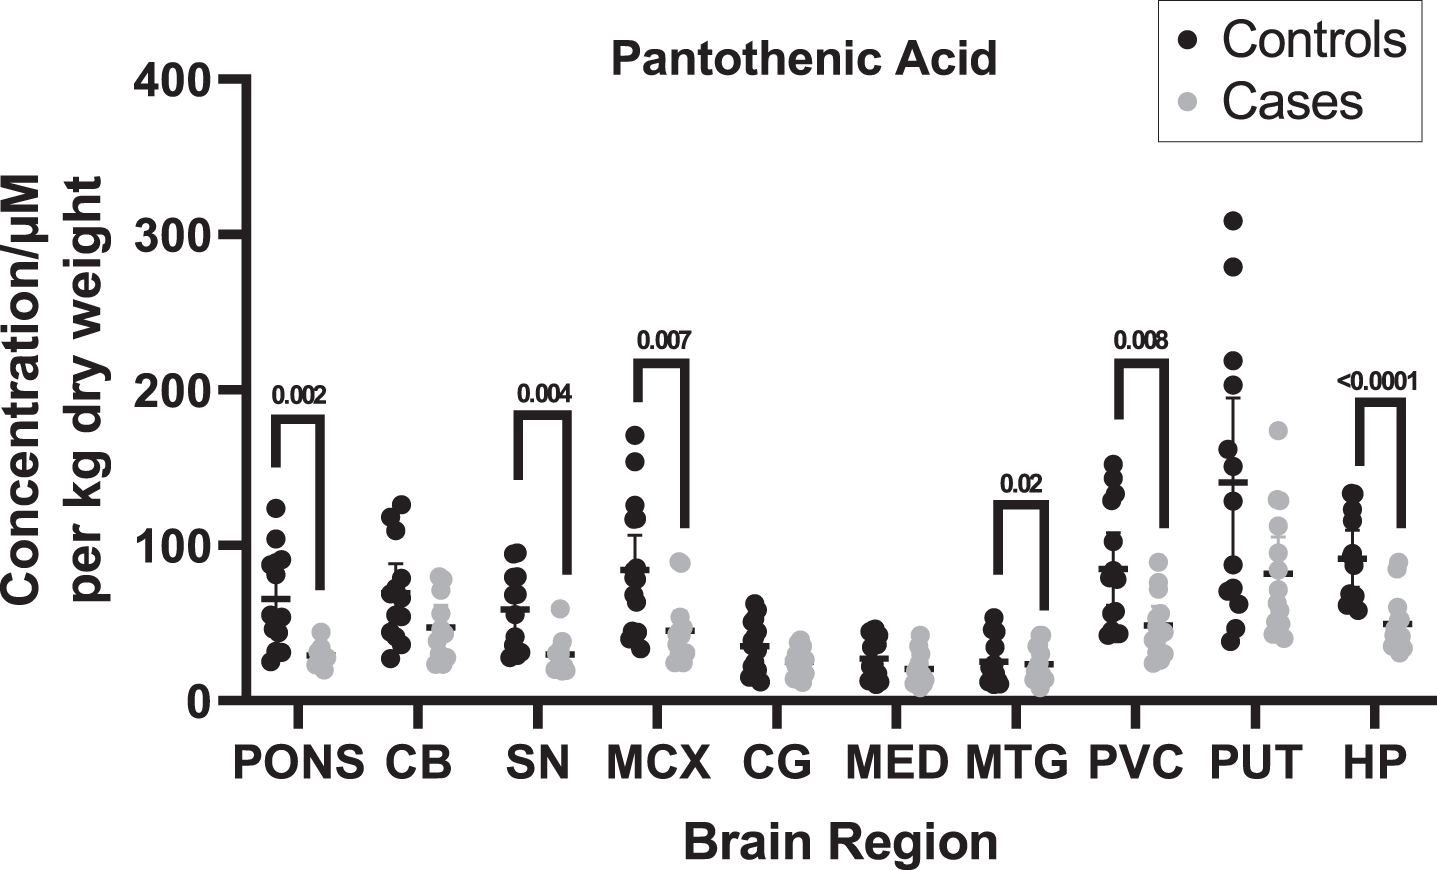 Pantothenic acid concentrations in DLB cases and controls. Figure shows mean urea concentrations±95% confidence intervals in μM/Kg. Case–control differences were determined using Mann–Whitney U test. CB, Cerebellum; SN, Substantia nigra; MCX, Motor cortex; CG, Cingulate gyrus; MED, Medulla; MTG, Middle temporal gyrus; PVC, Primary visual cortex; PUT, Putamen; HP, Hippocampus.